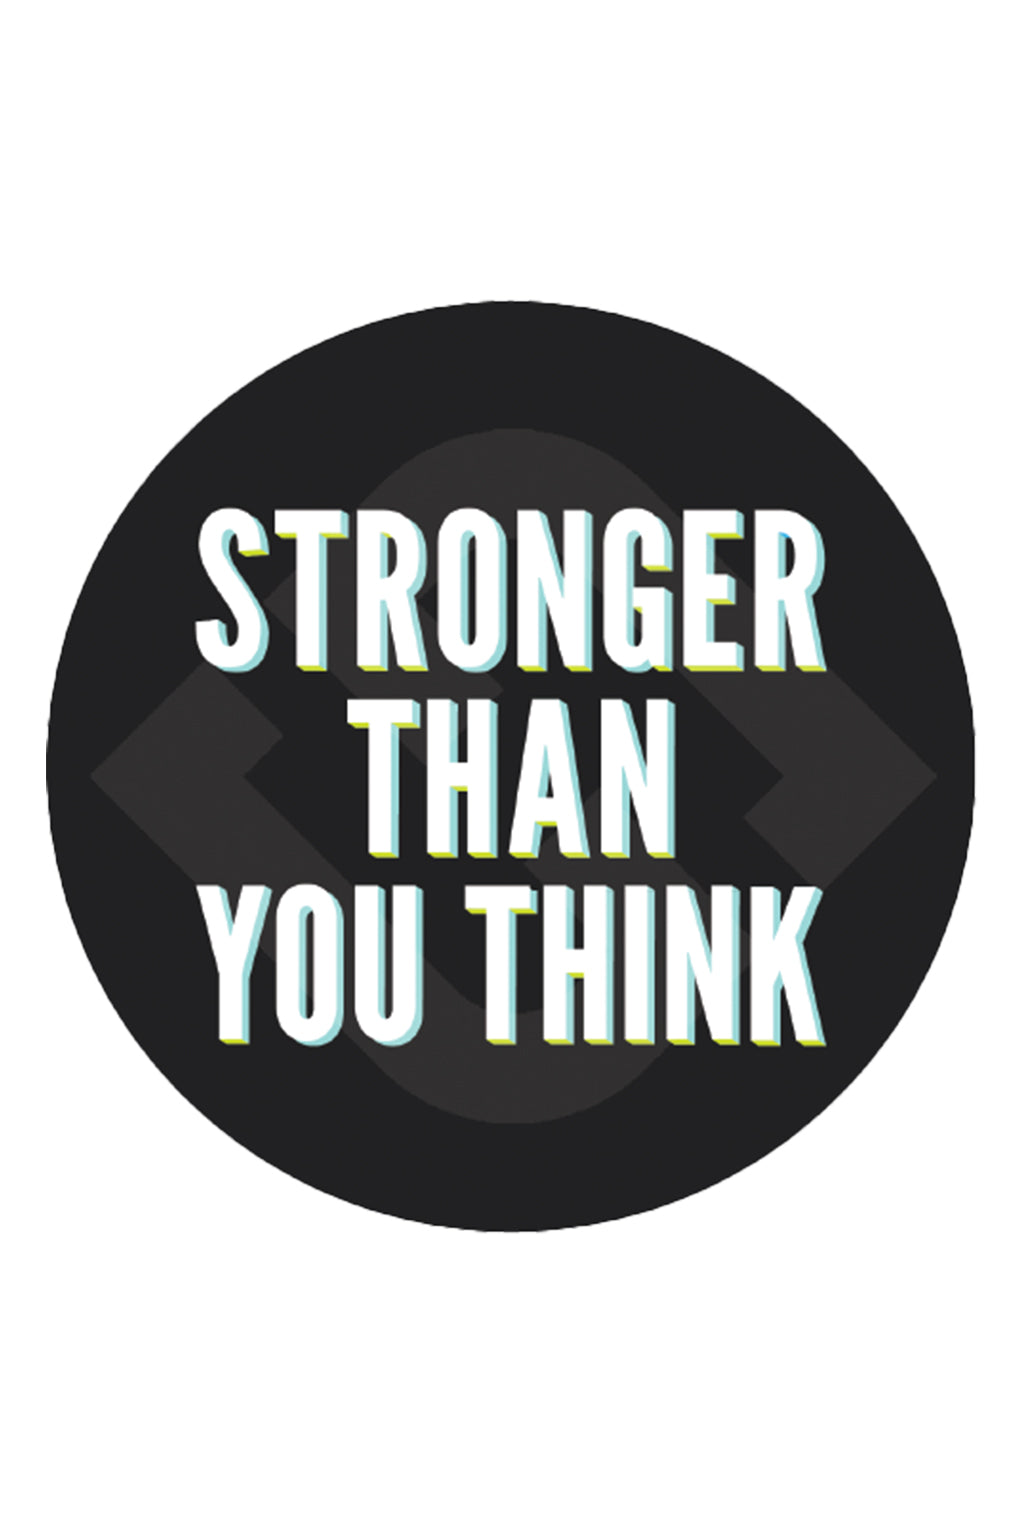 Black round 3" vinyl sticker that says "Stronger than you think"